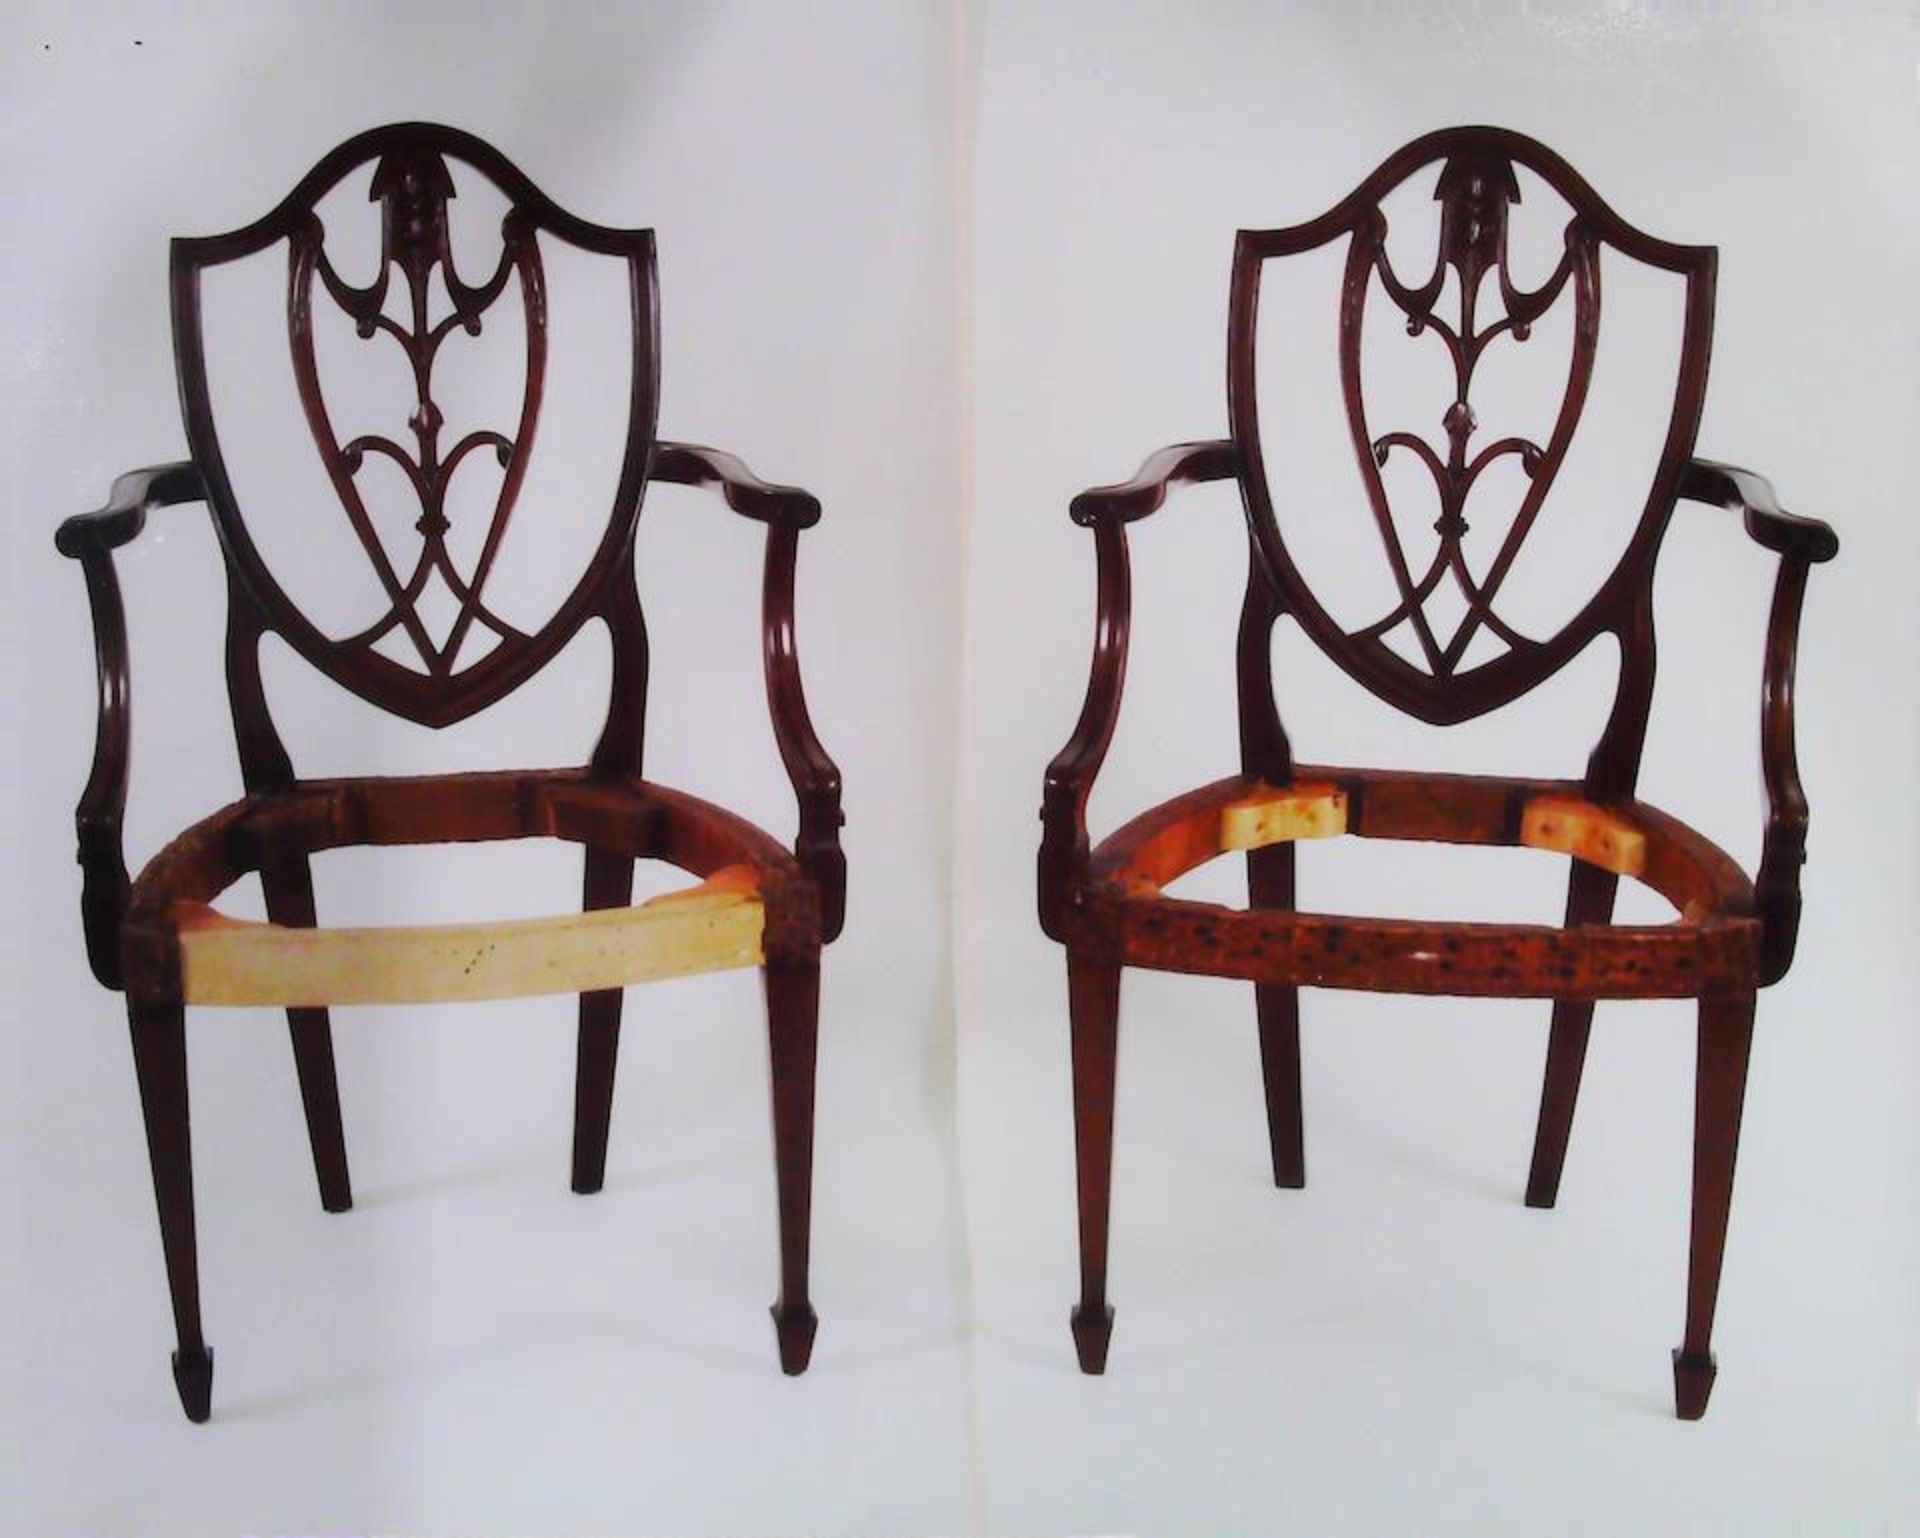 Pair of Federal Mahogany Shield-back Armchairs, probably New York, New York, c. 1790. - Image 2 of 3